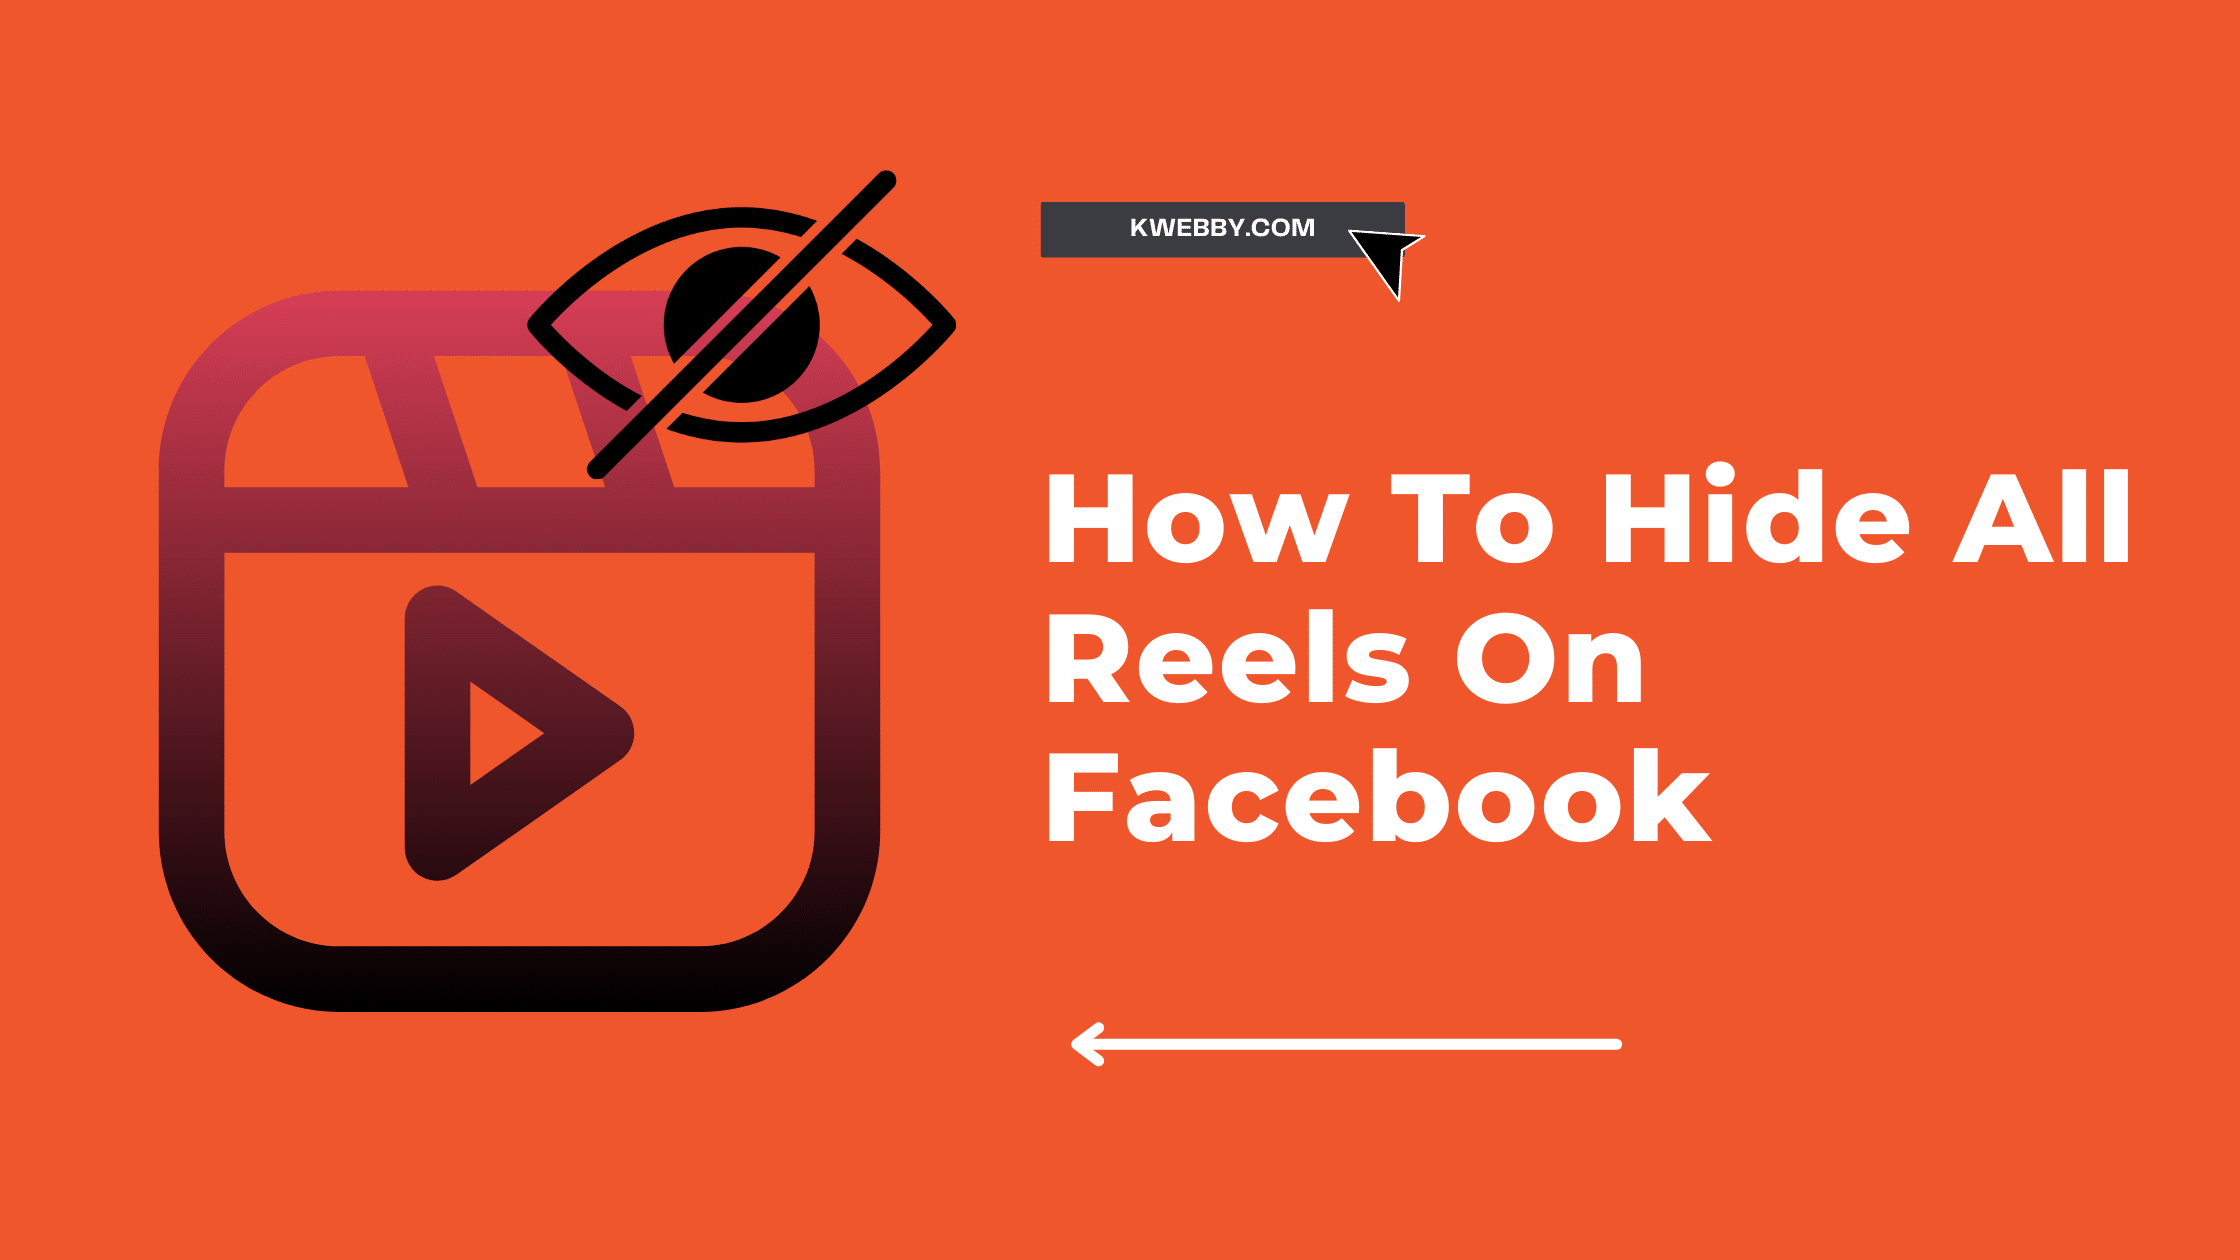 How To Hide All Reels On Facebook